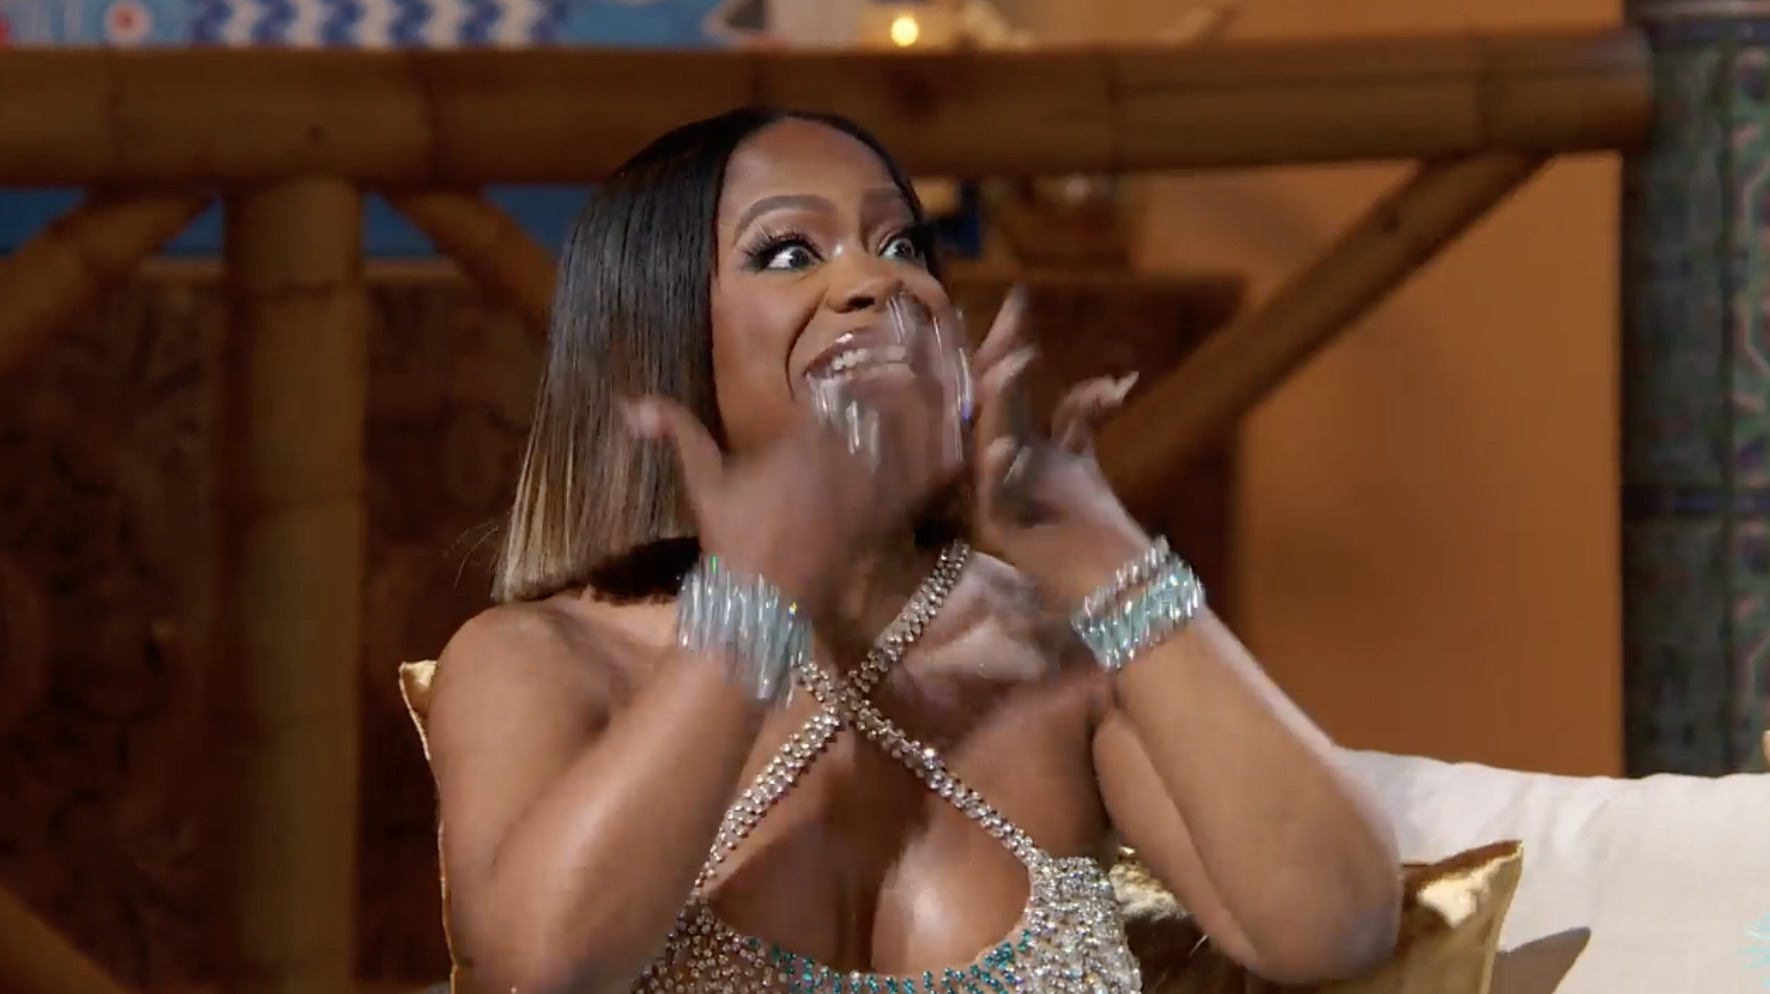 RHOA Reunion: BRAVO’S ‘THE REAL HOUSEWIVES OF ATLANTA’ TWO-PART REUNION